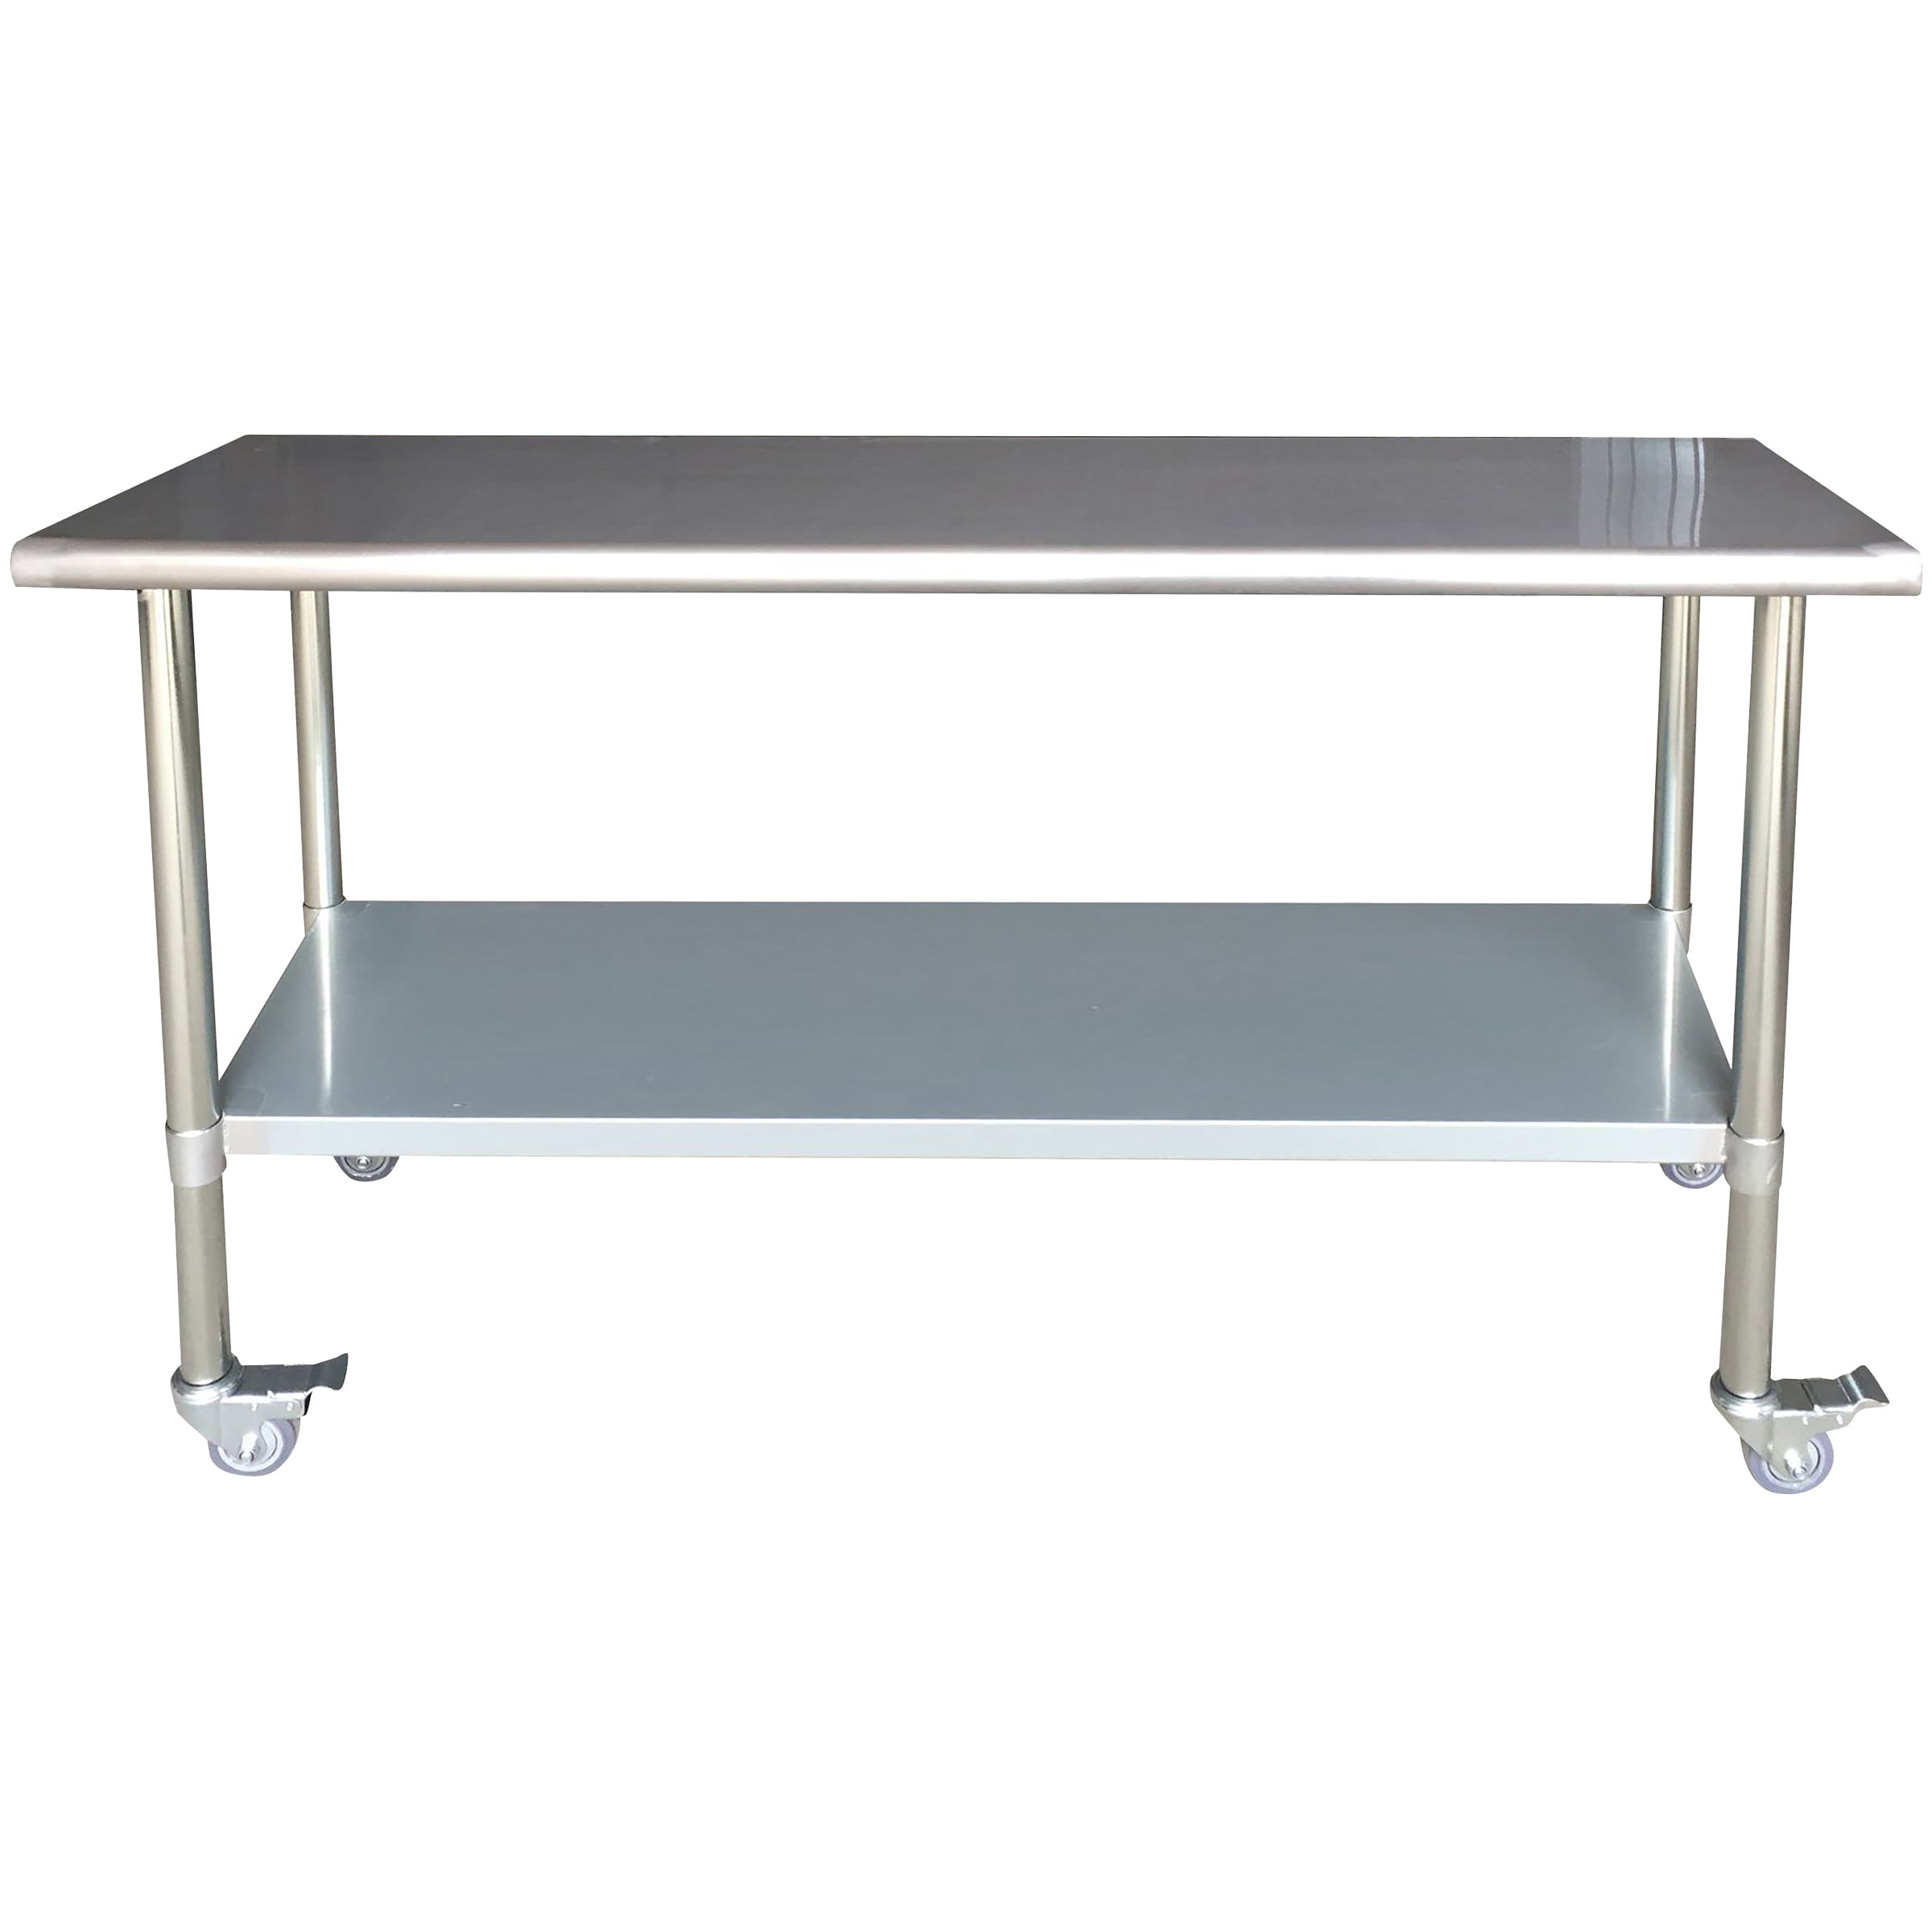 Picture of Sportsman Series SSWTWC72 24 x 72 in. Stainless Steel Work Table with Casters